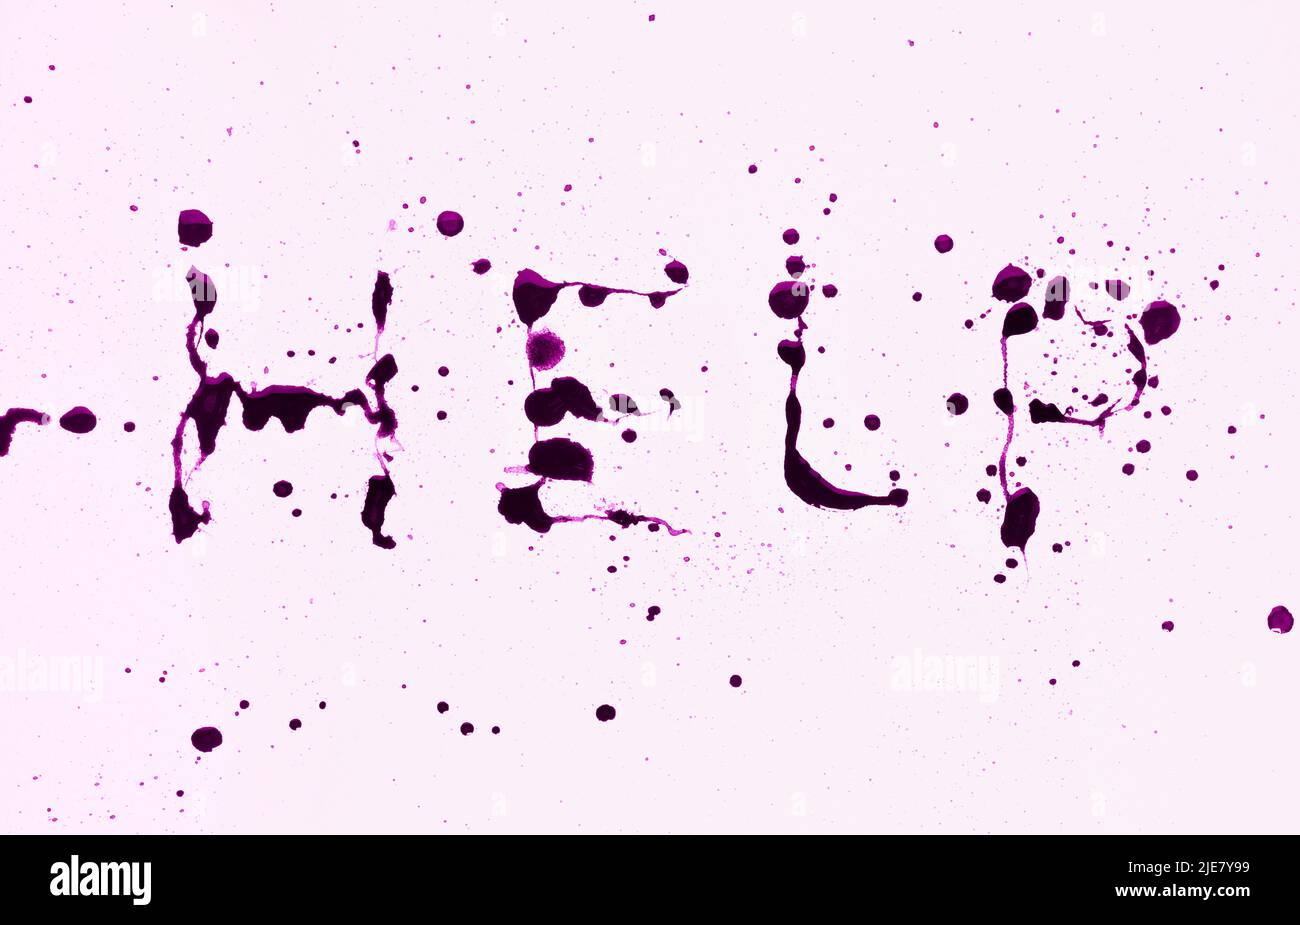 Word HELP written with purple and black watercolors on white backgroud Stock Photo